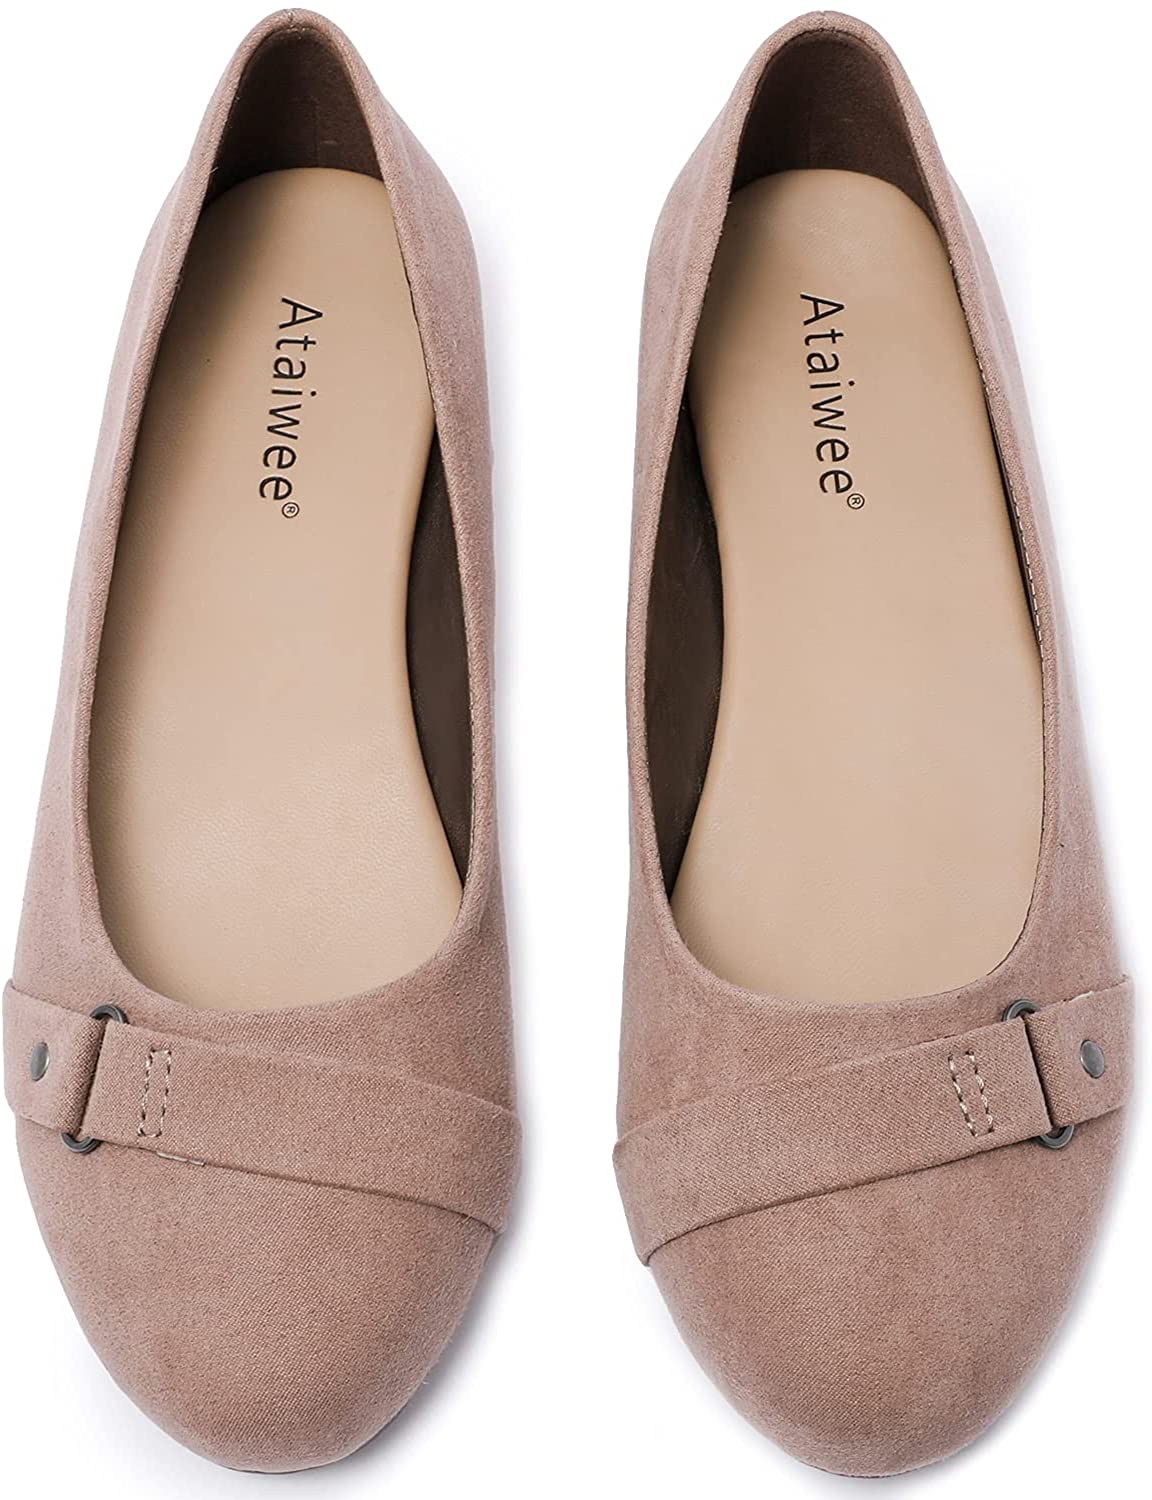 Round Toe Suede Classic Cozy Cute Slip-on Flat Shoes. Ataiwee Womens Ballet Flats